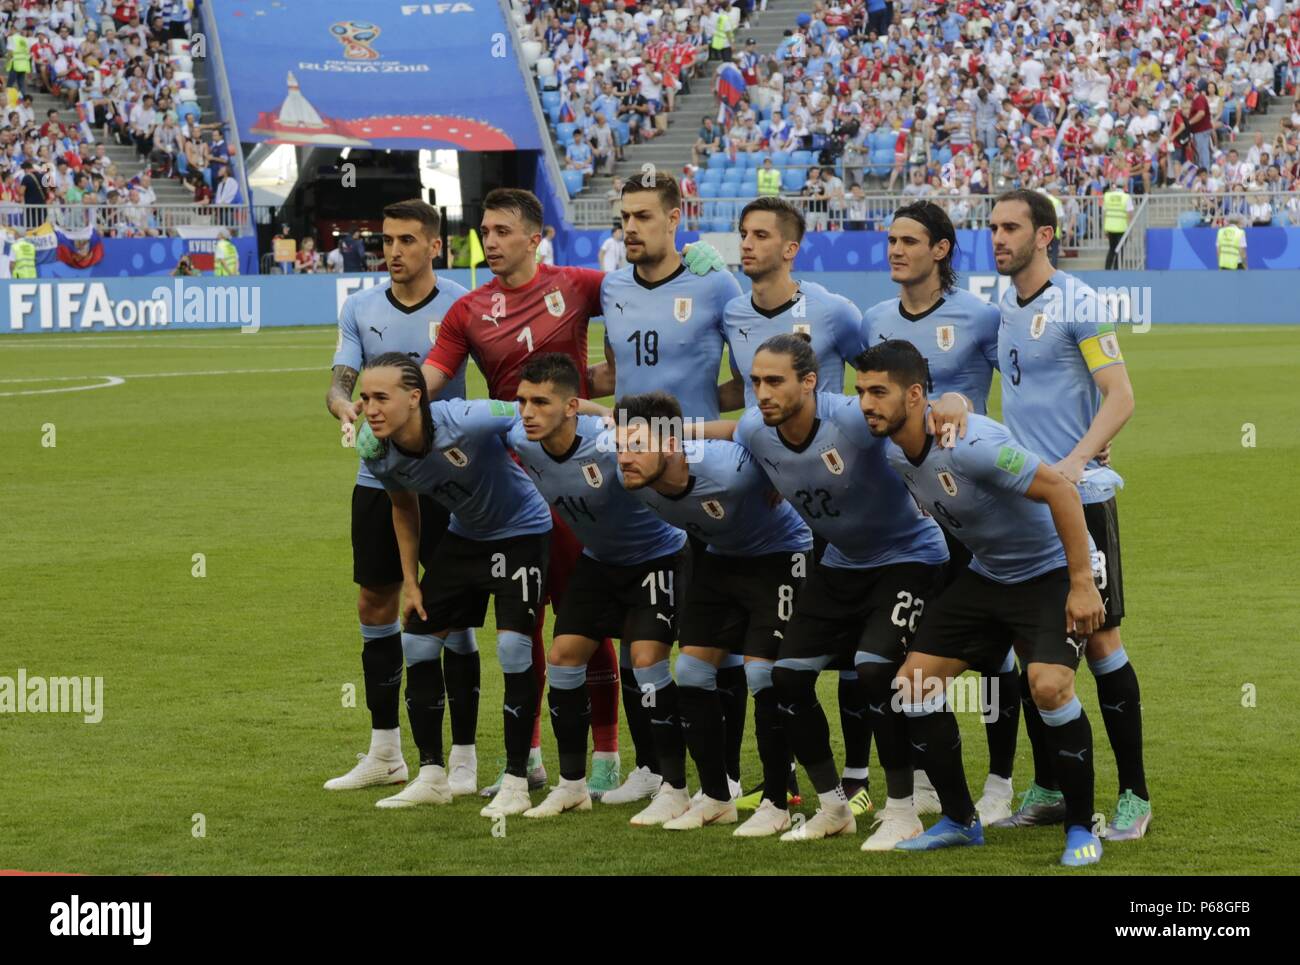 June 25 18 Russia Samara Fifa World Cup 18 Group A Uruguay Blue T Shirts V Russia 3 0 In Picture Uruguay S National Football Team Before The Match Stock Photo Alamy